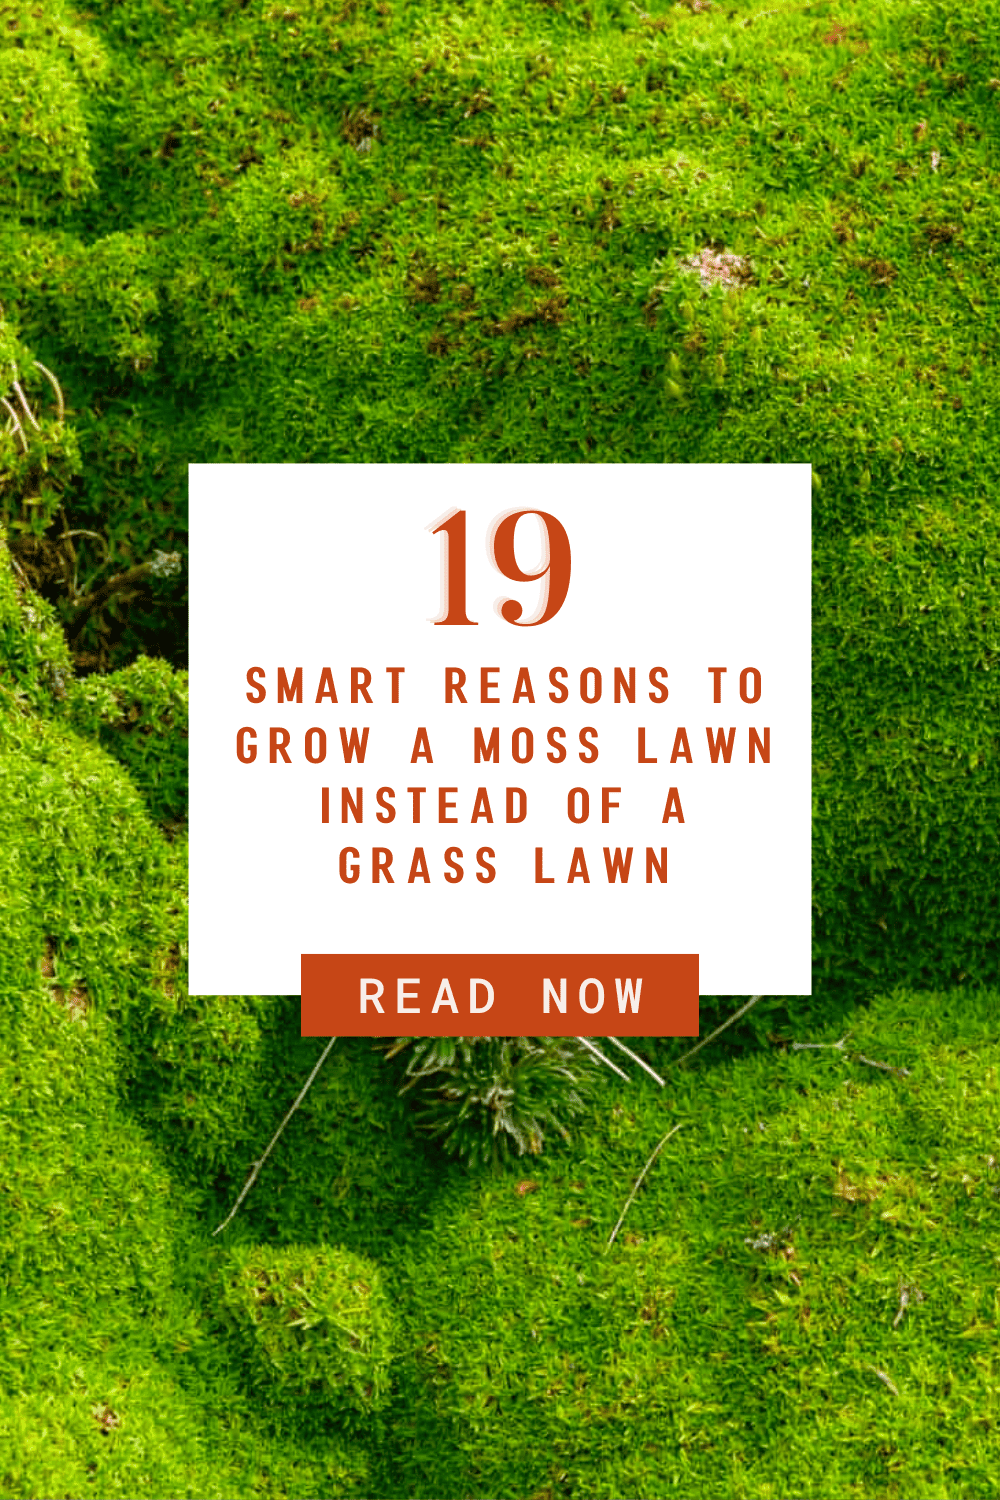 19 smart reasons to grow a moss lawn instead of a grass lawn.